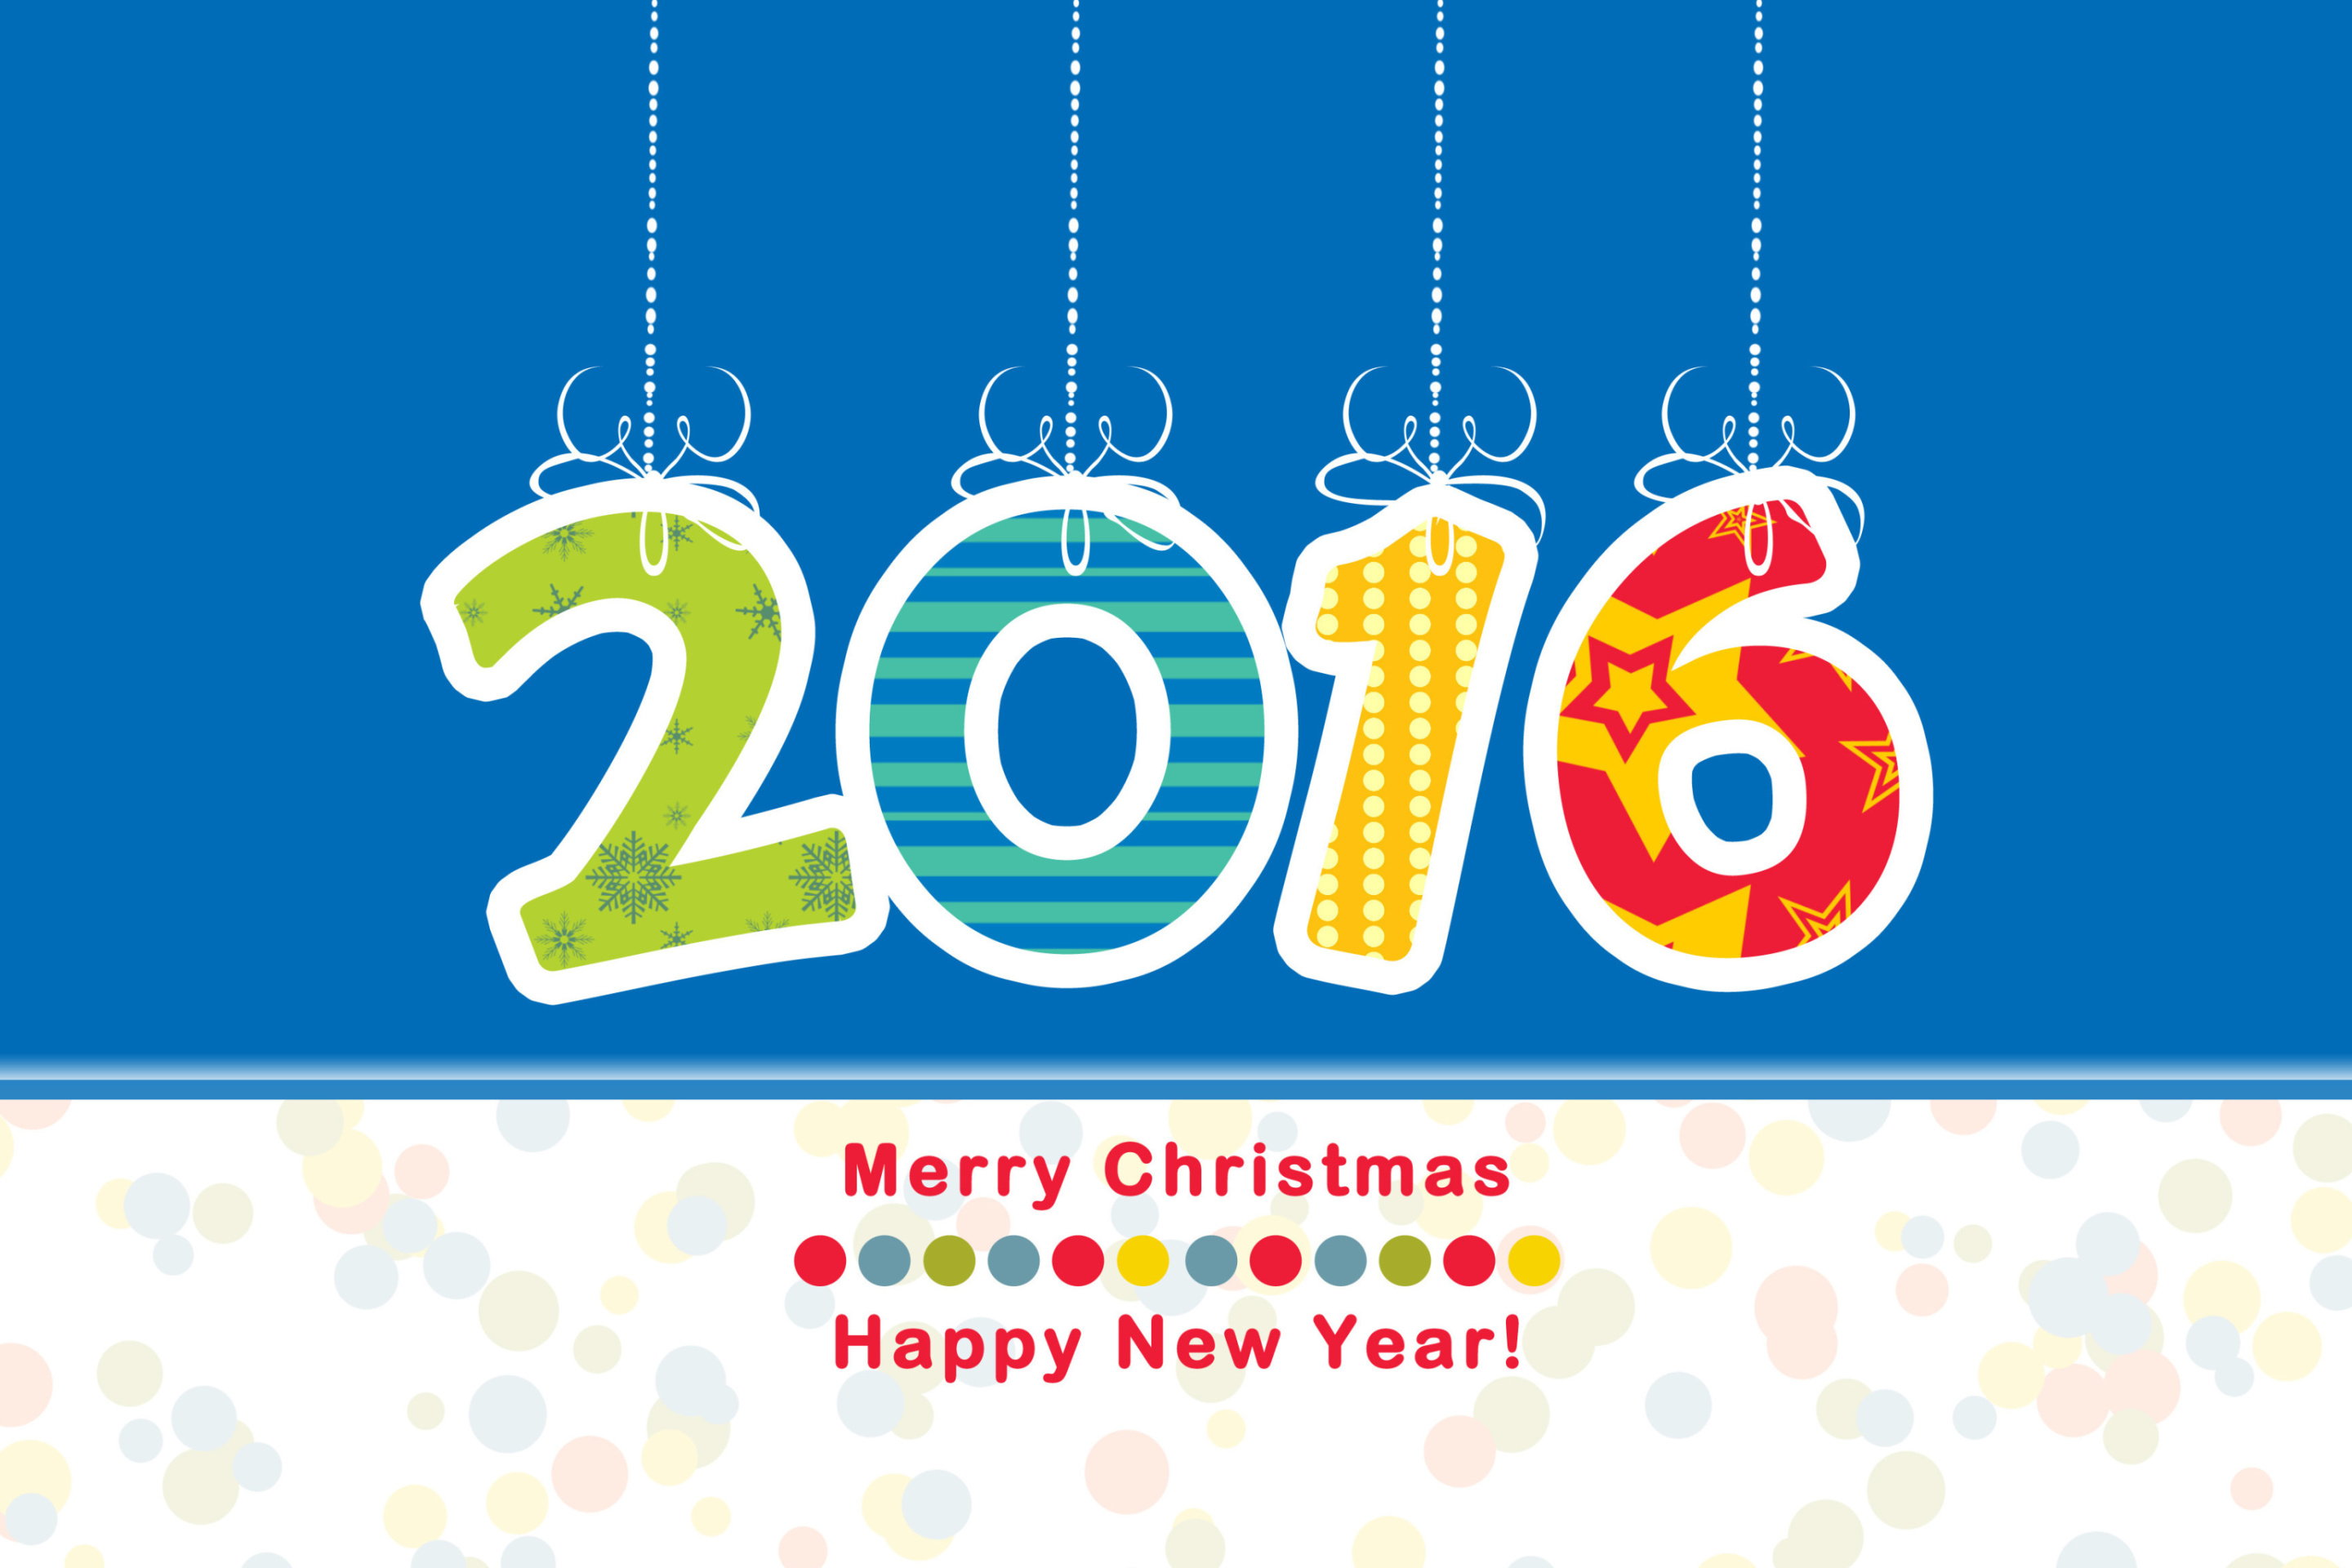 Colorful New Year 2016 Greetings wallpaper 2880x1920